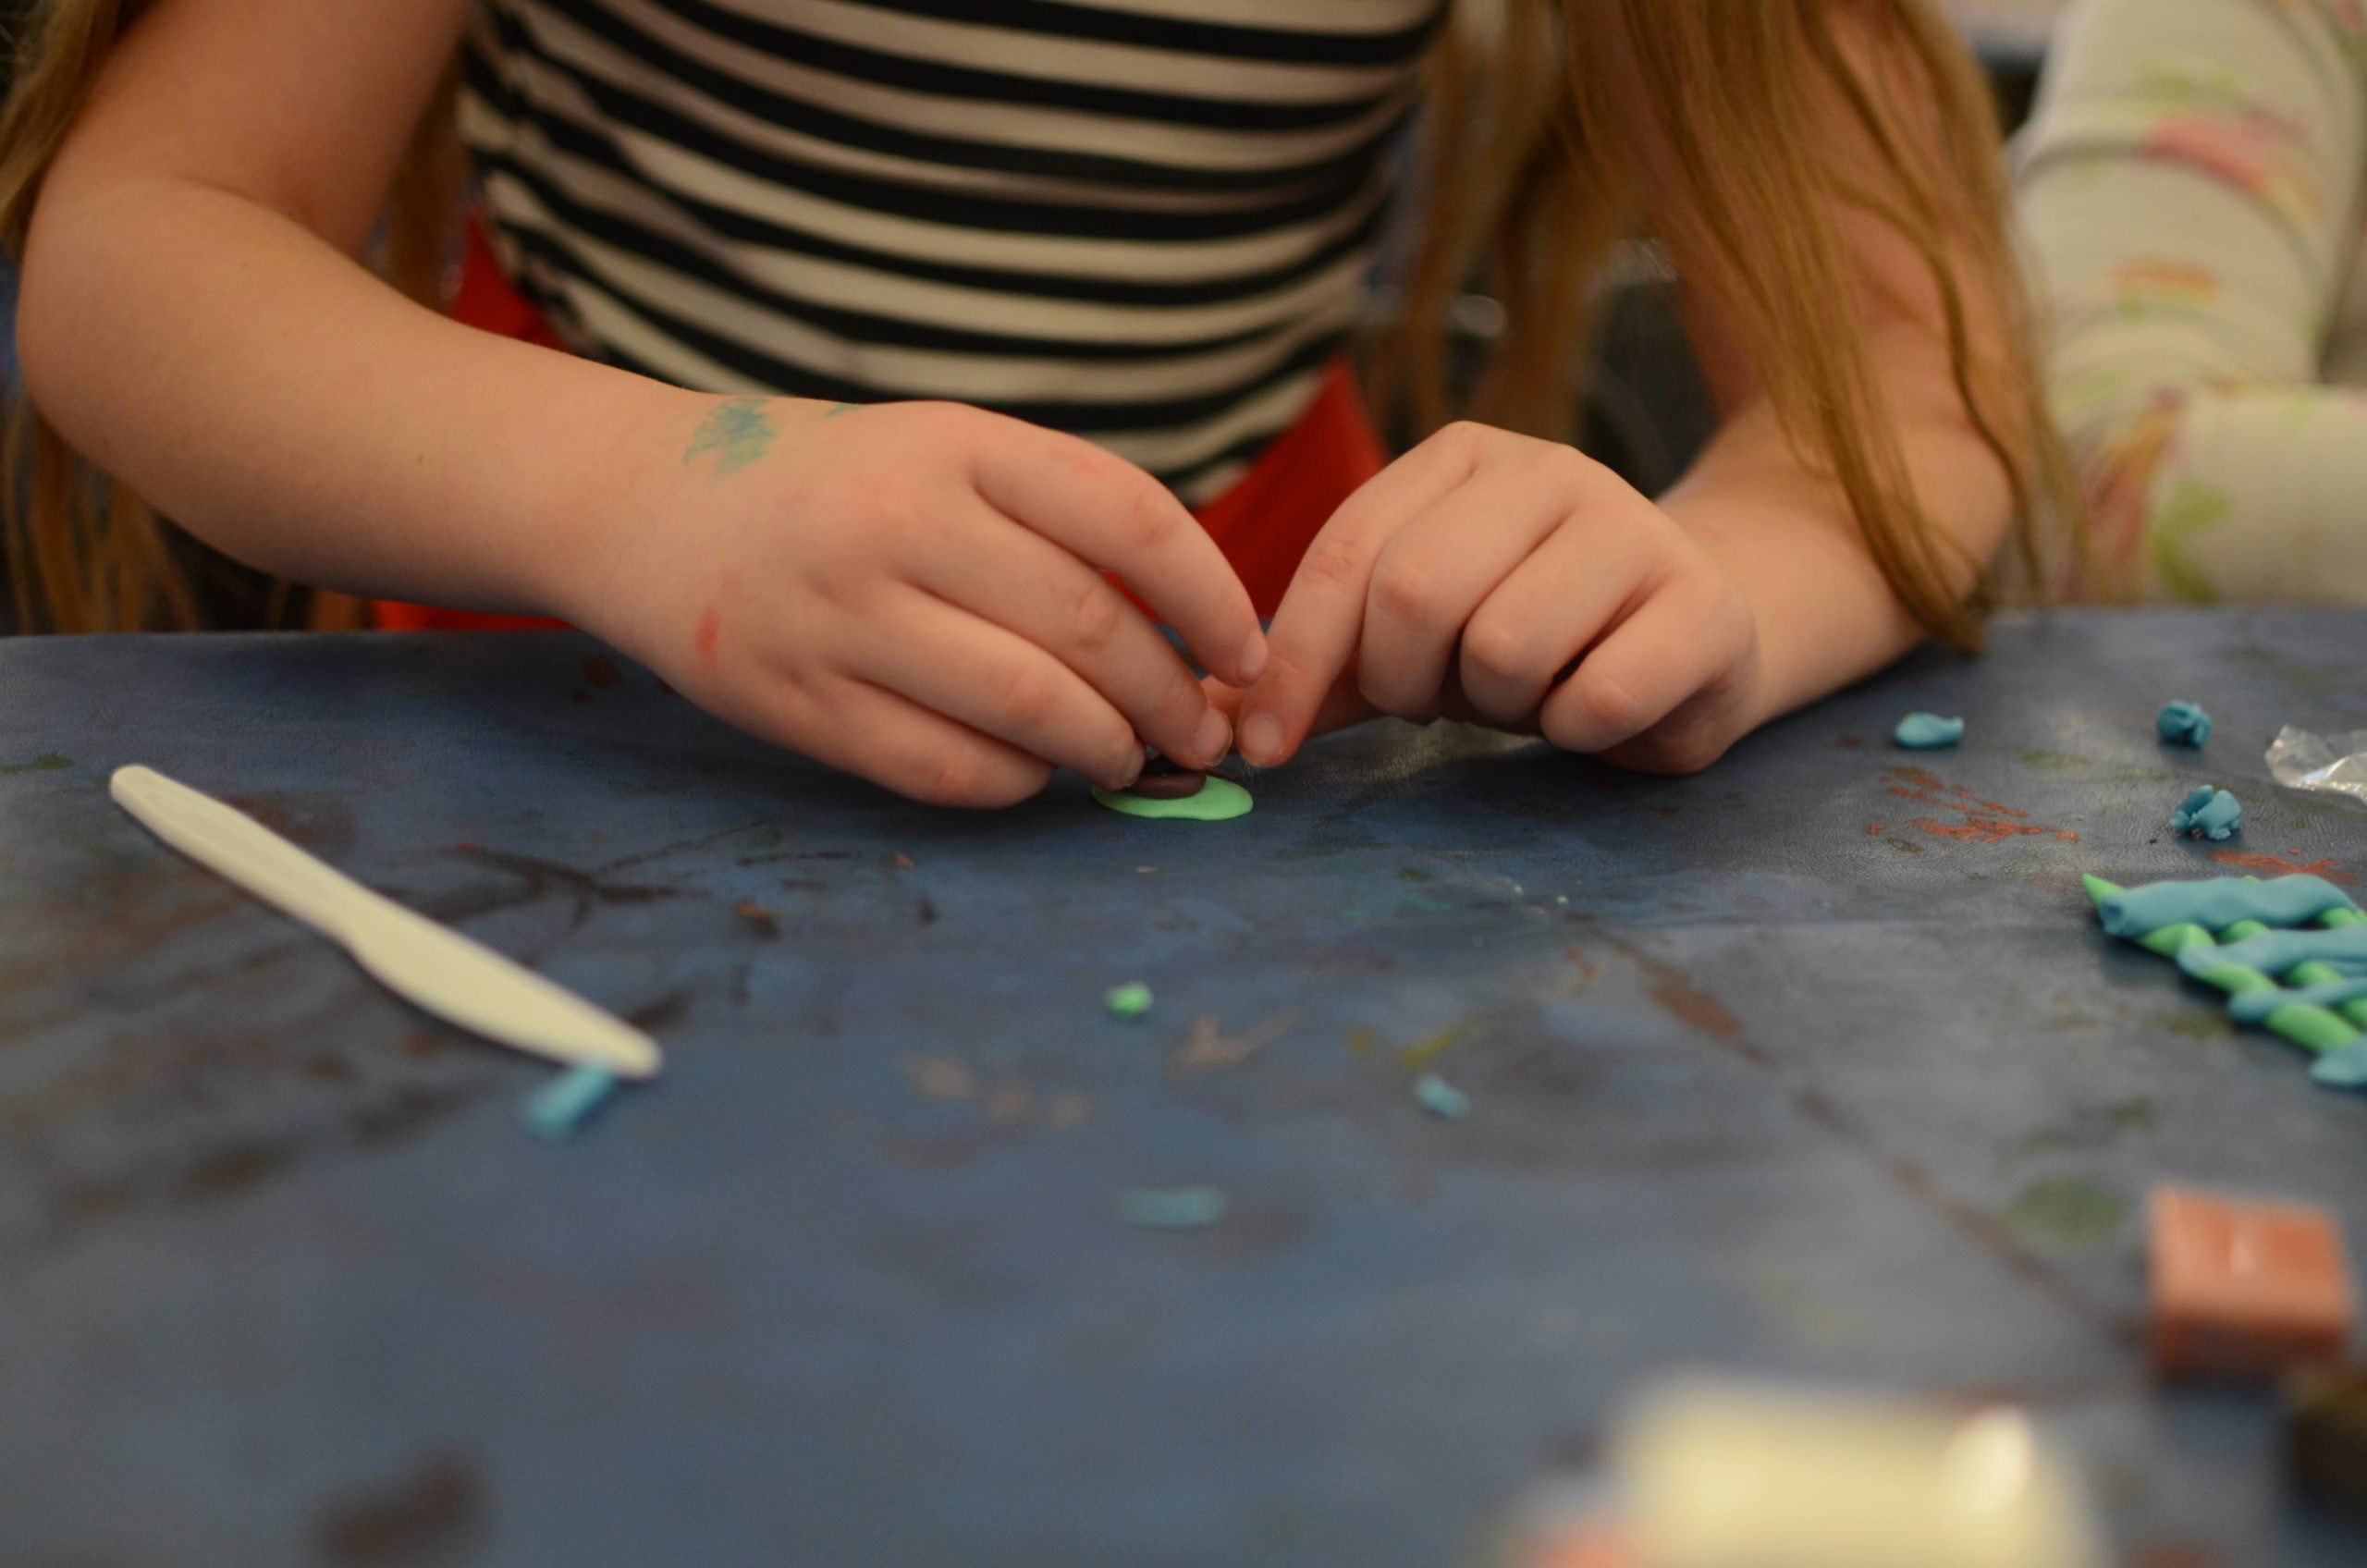 A young kid's hands carefully sculpt with colorful clay